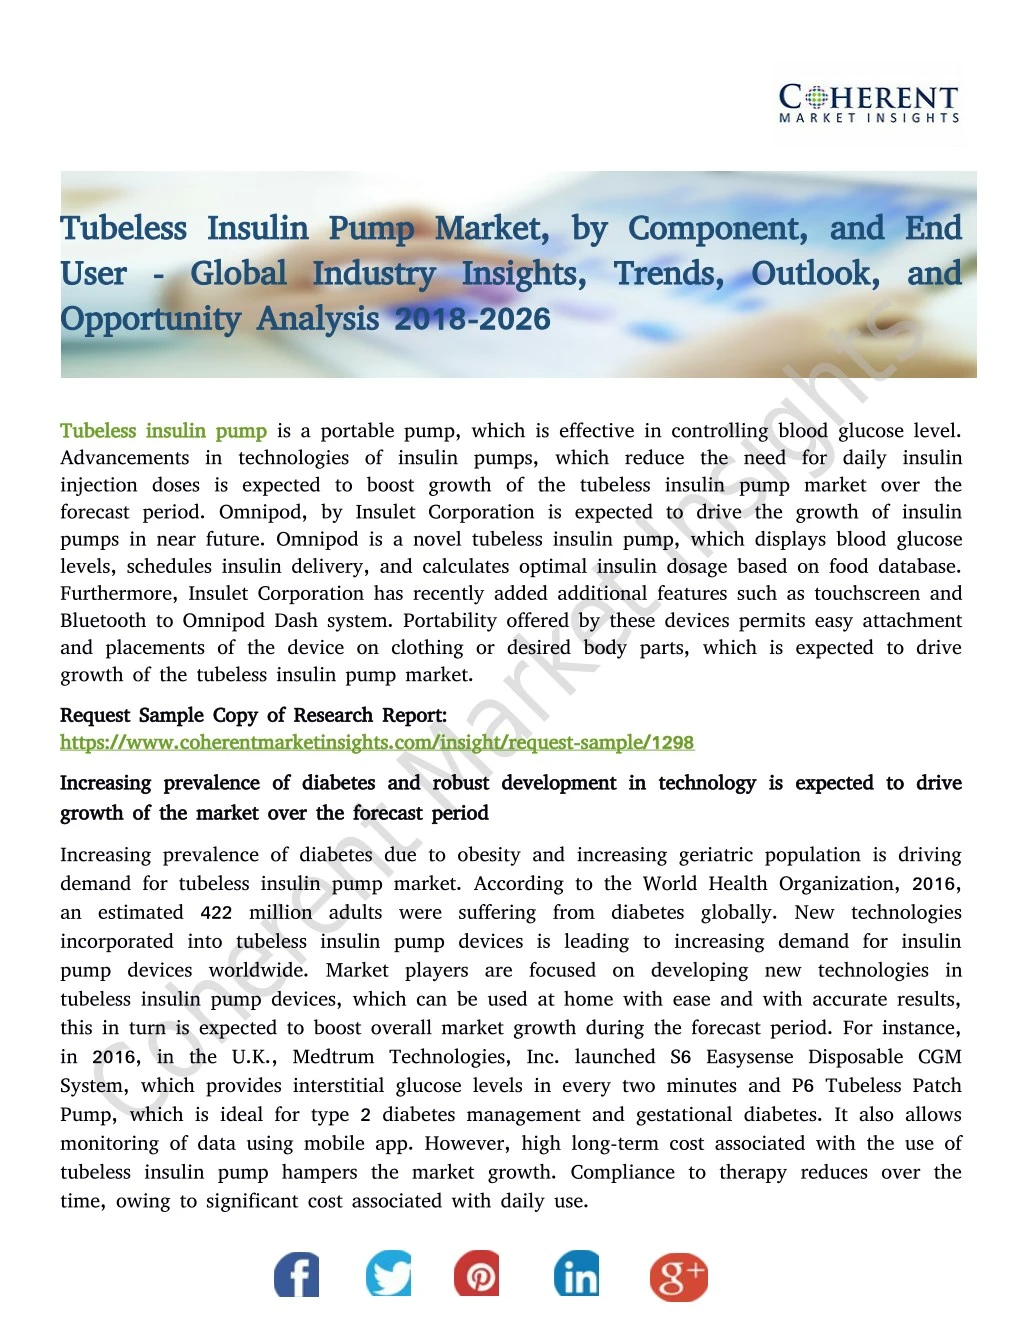 tubeless insulin pump market by component